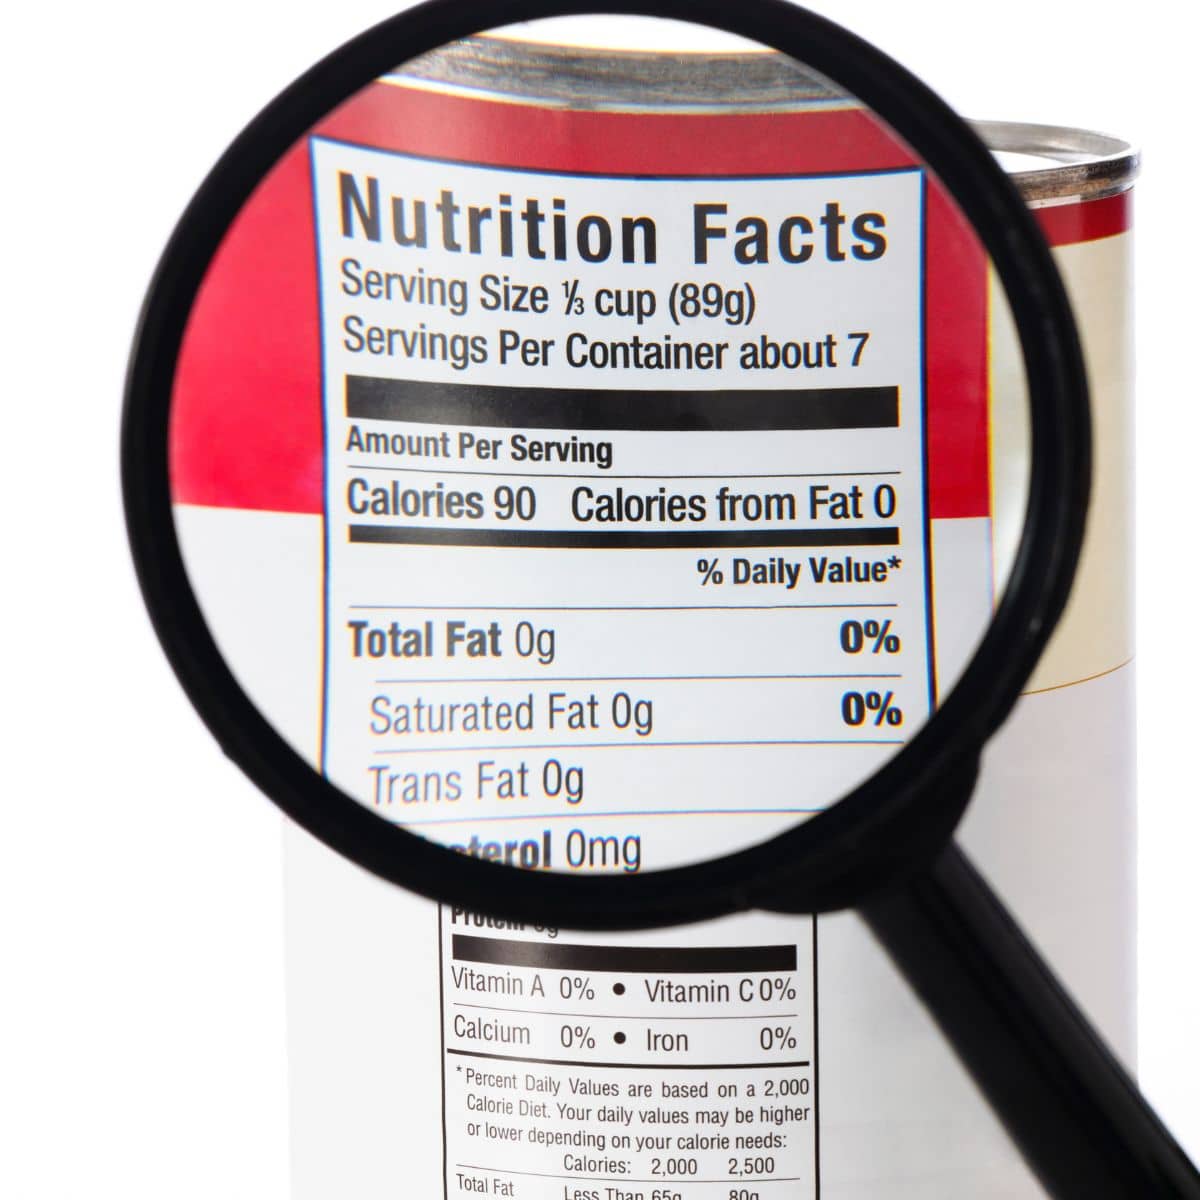 A photo with an ingredients label on a can of food.